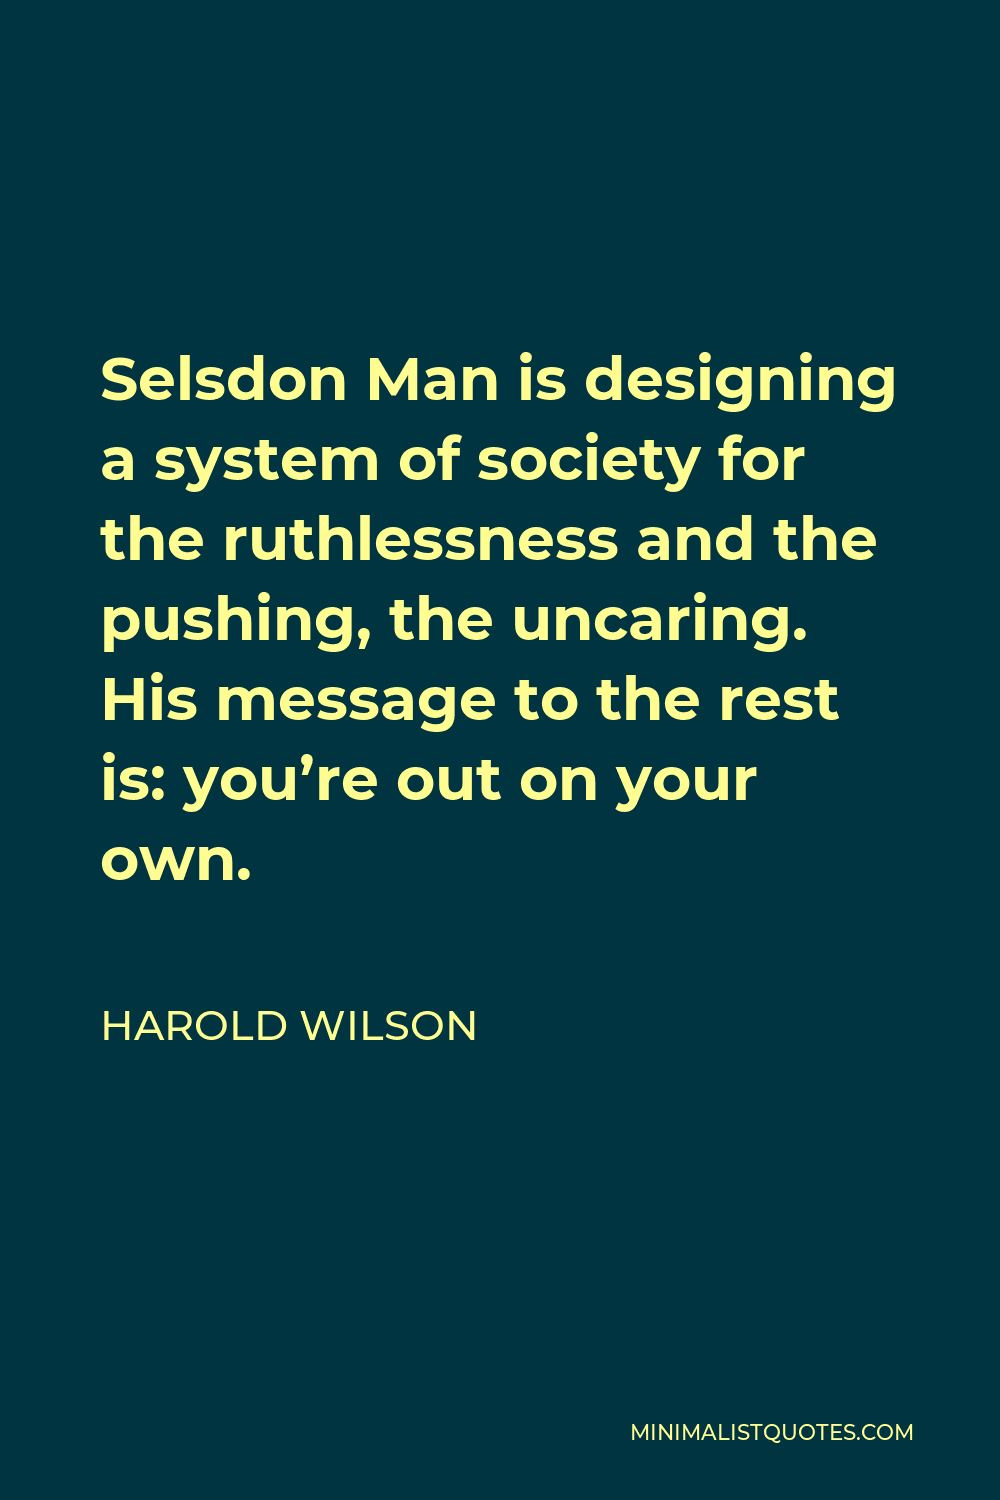 Harold Wilson Quote - Selsdon Man is designing a system of society for the ruthlessness and the pushing, the uncaring. His message to the rest is: you’re out on your own.